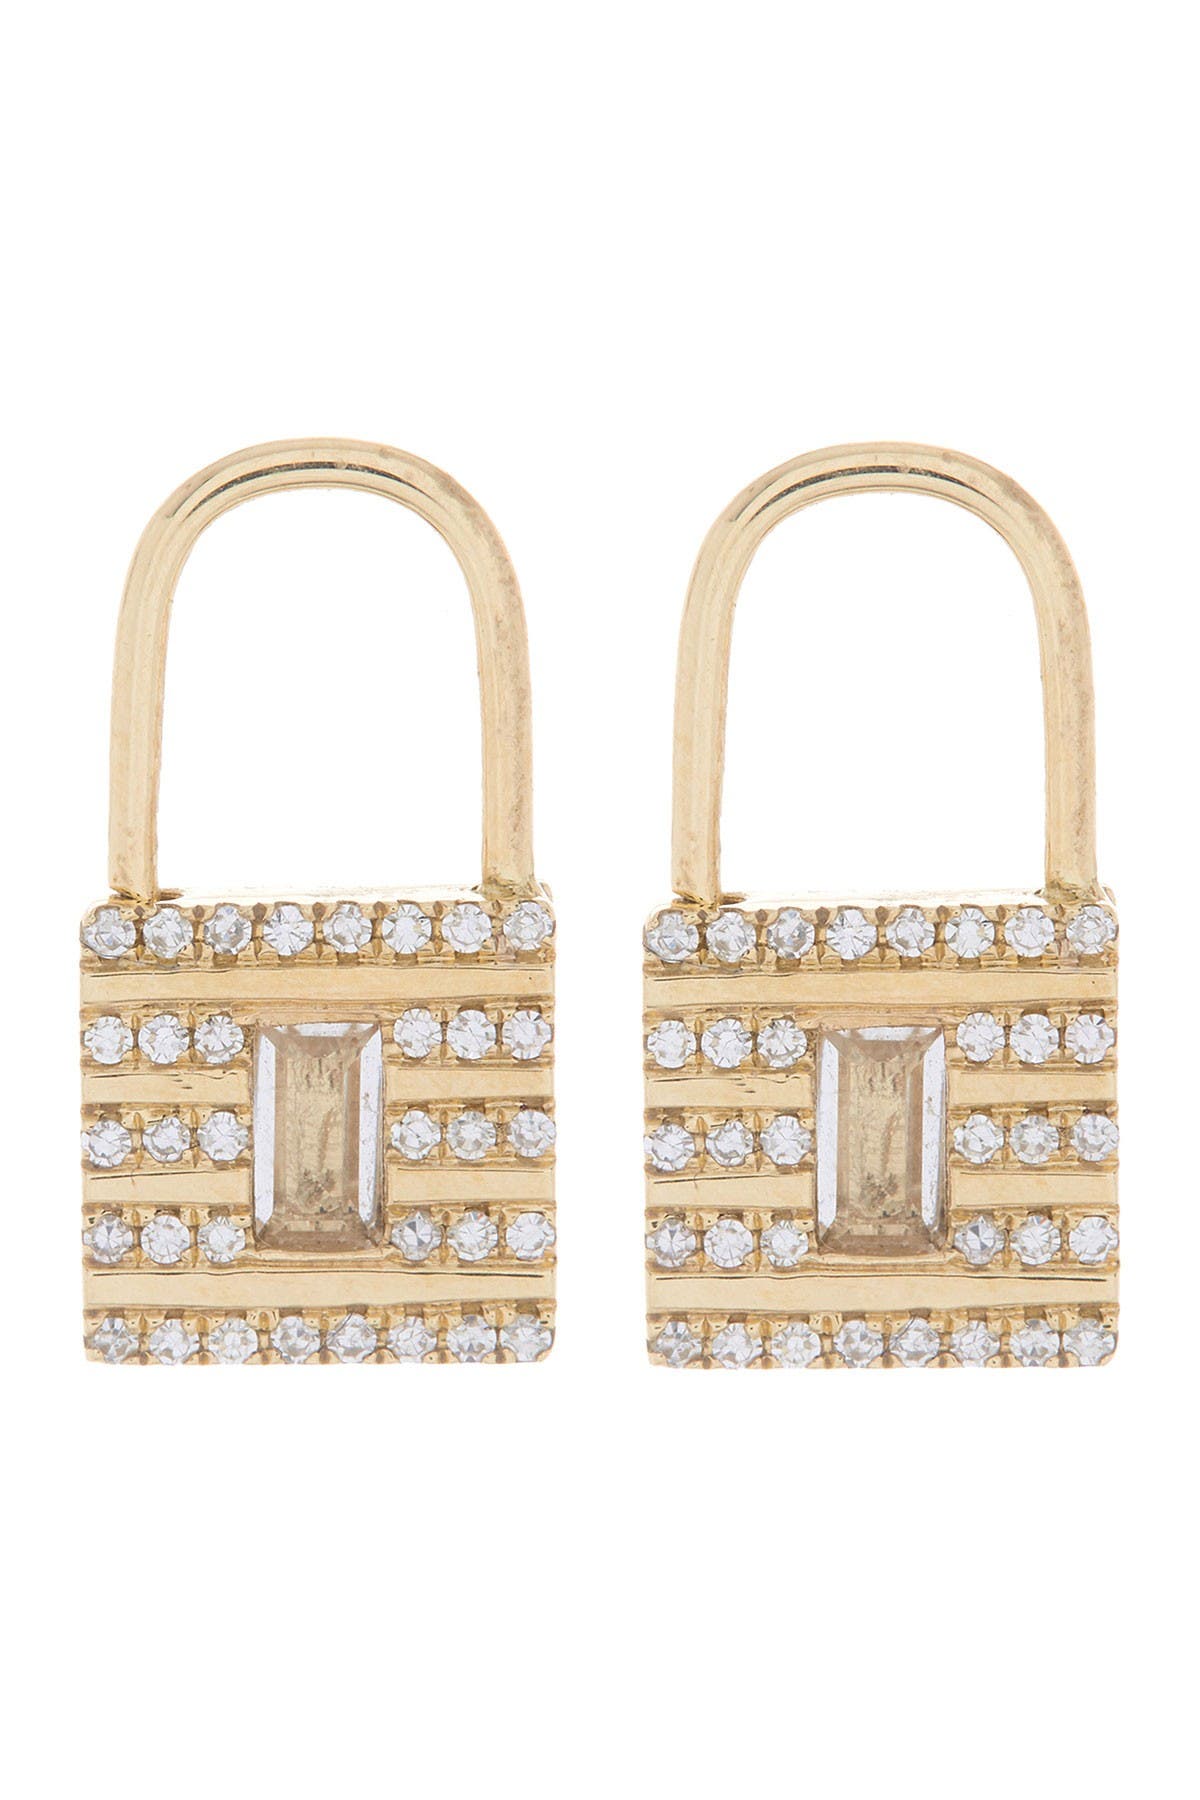 Ef Collection 14k White Gold Pave Diamond & White Sapphire Lock Single Stud Earring In 14k Yellow Gold